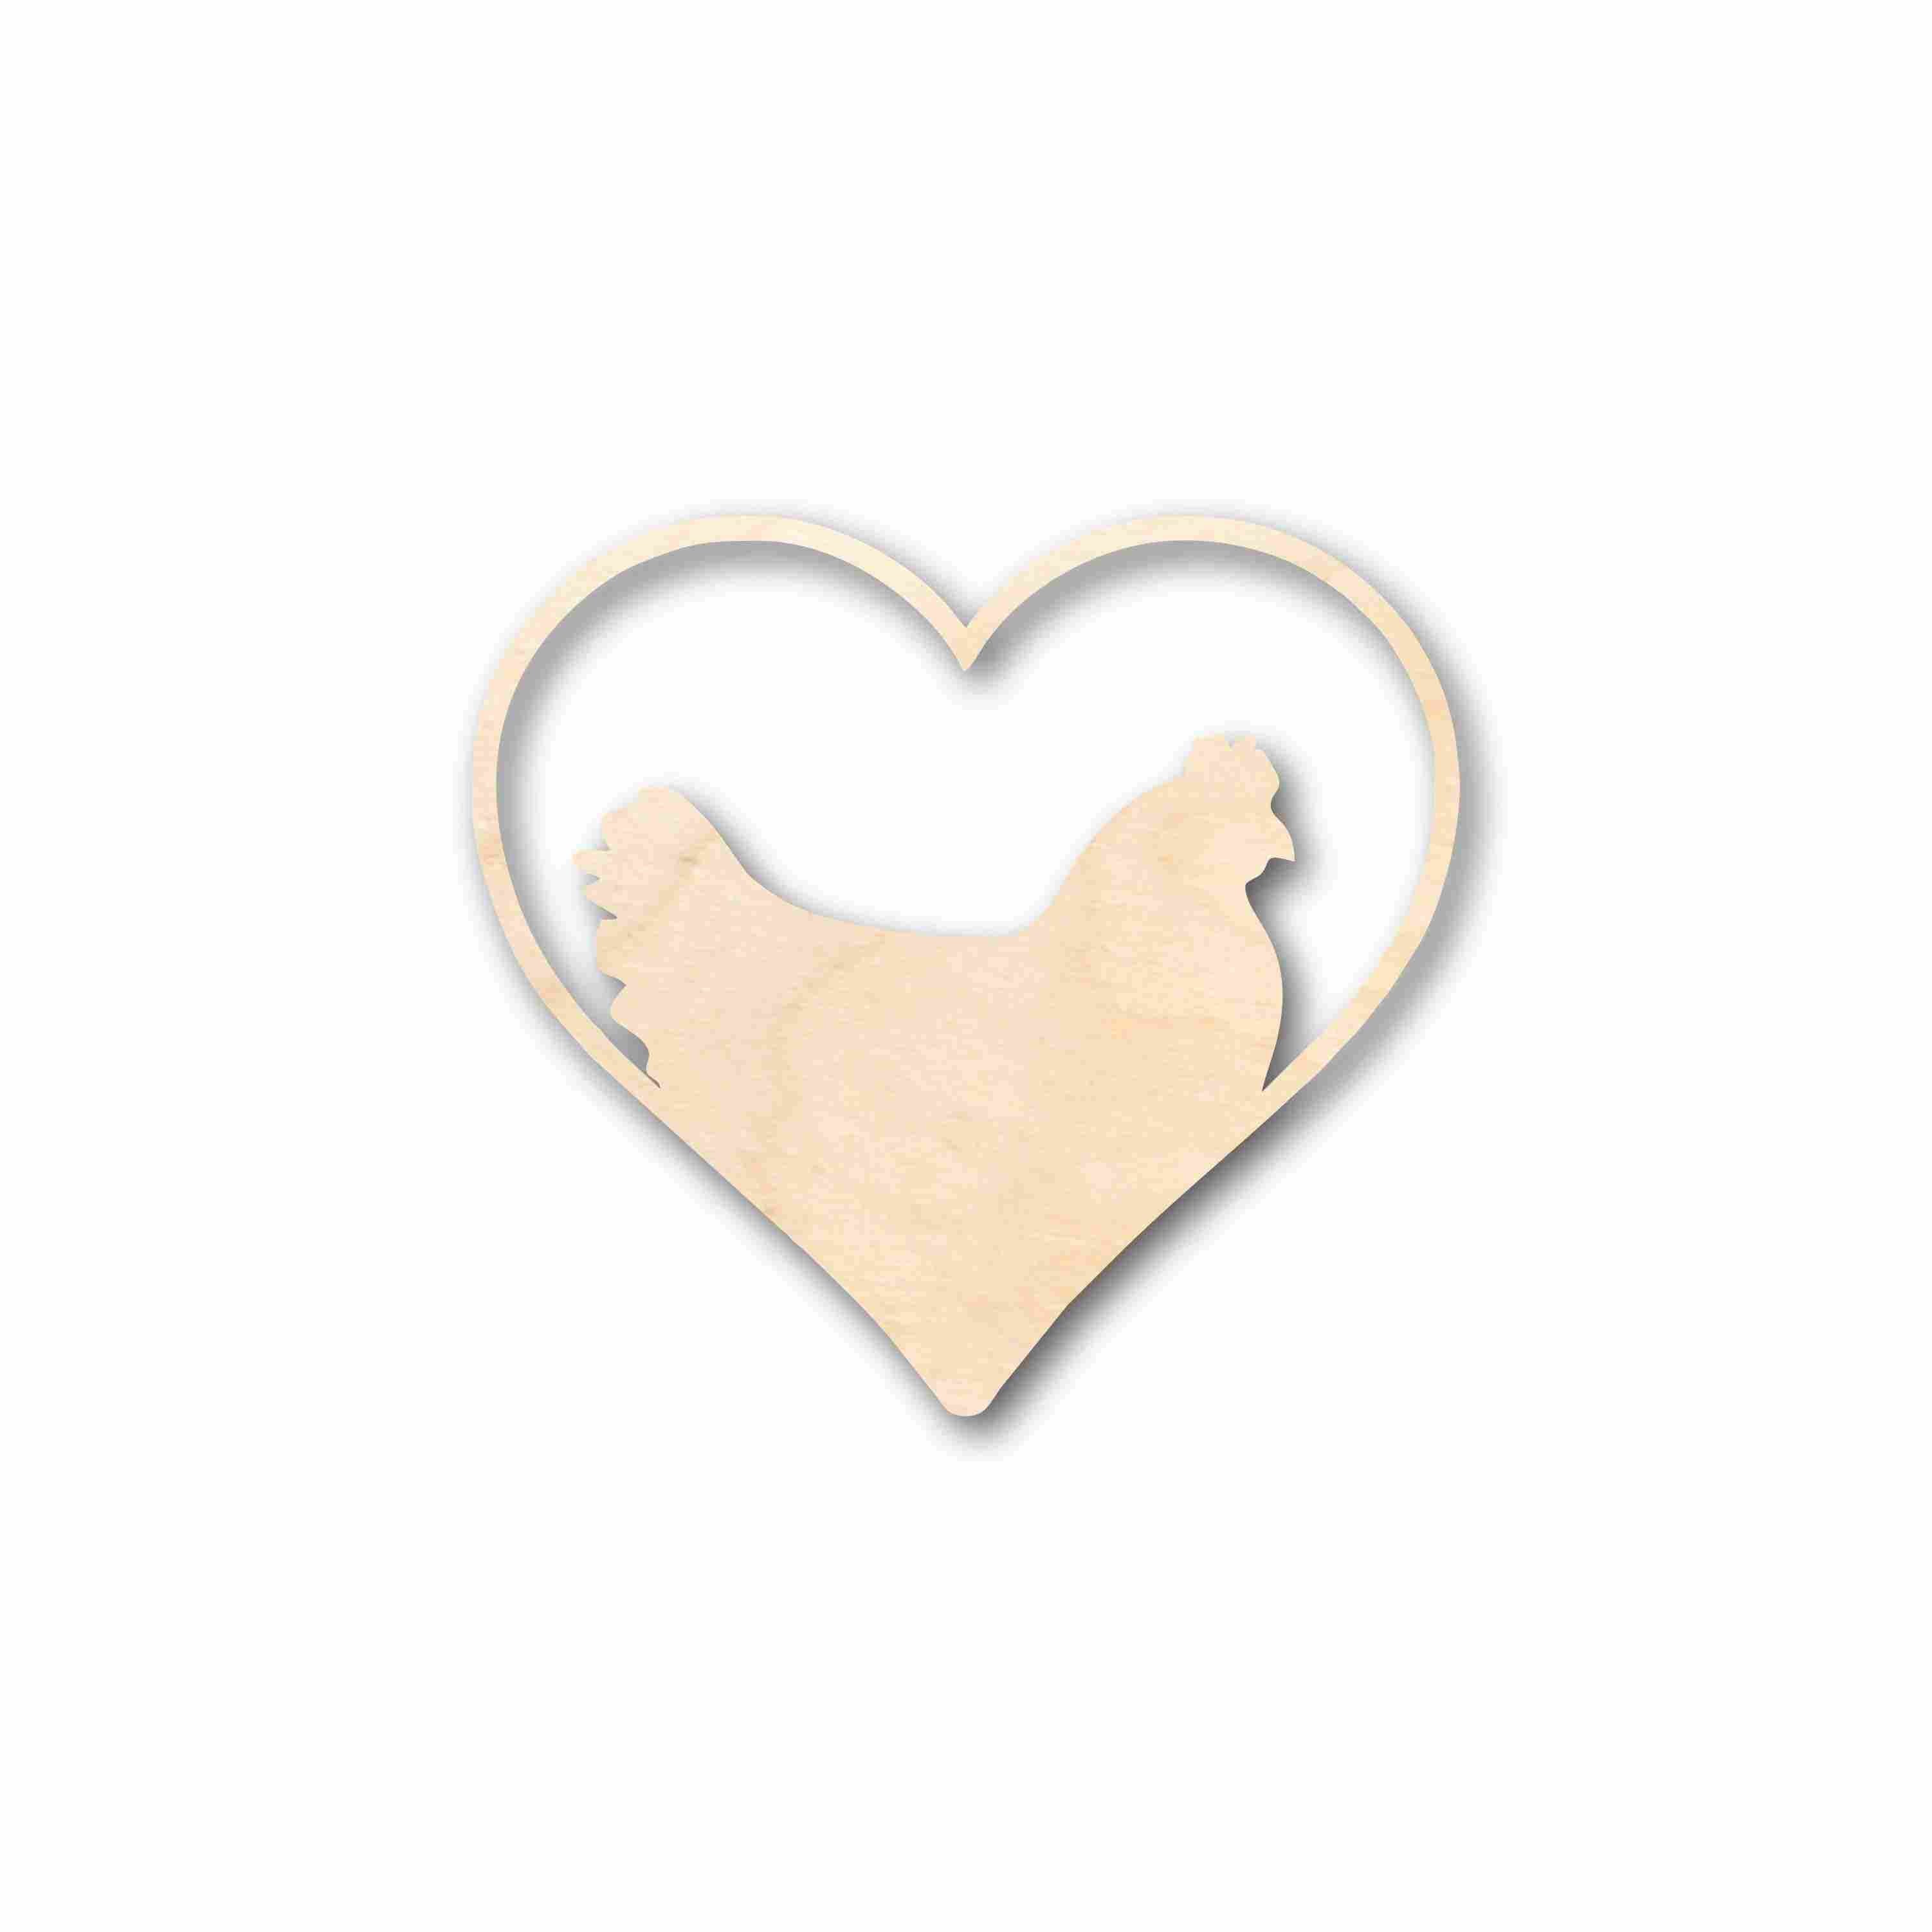 Unfinished Wood Chicken Heart Silhouette - Craft- up to 24